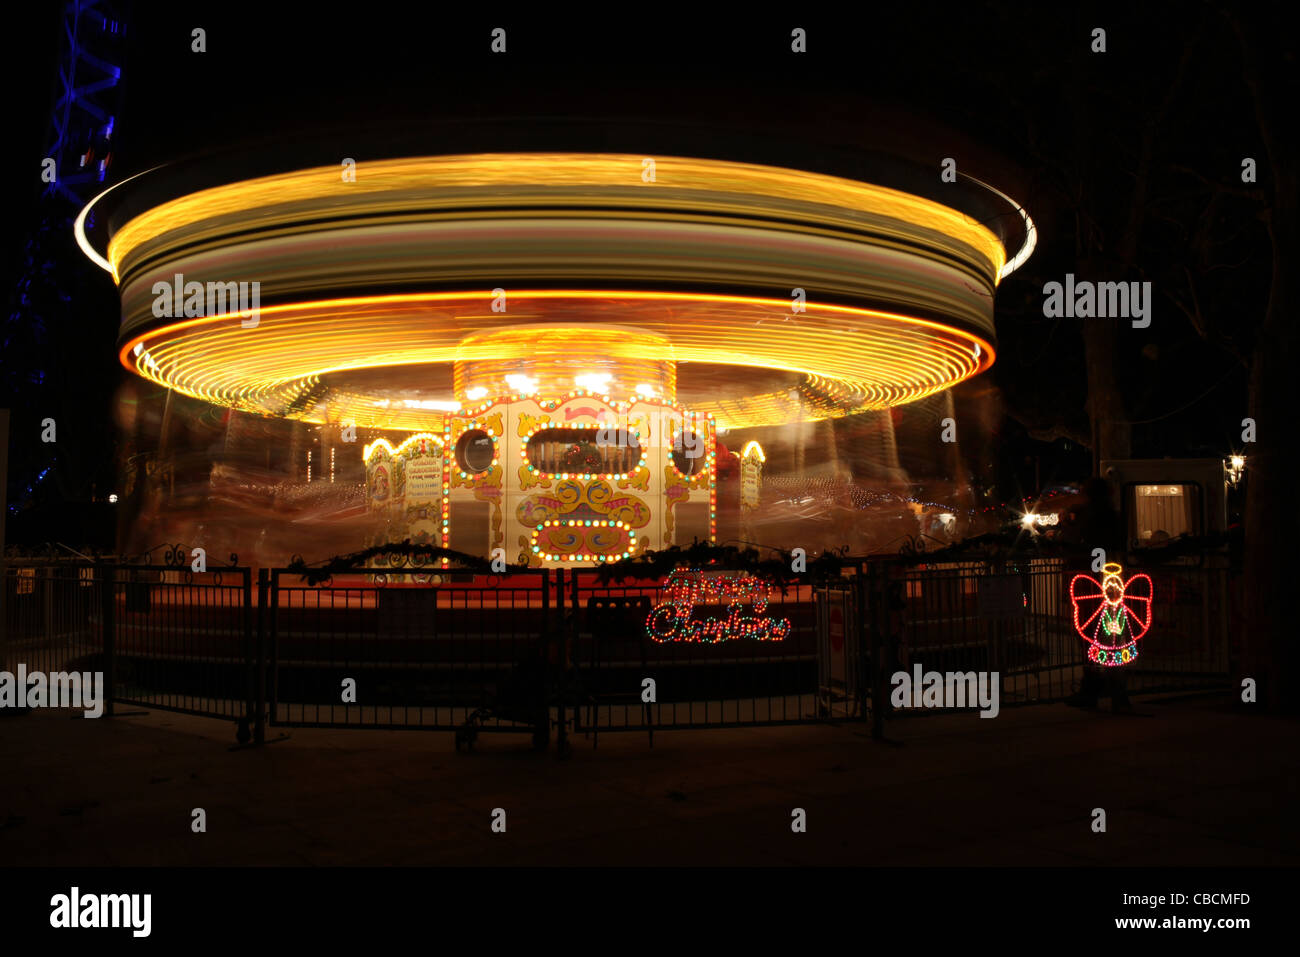 Long exposure of carousel/merry-go-round at night with lights Stock Photo